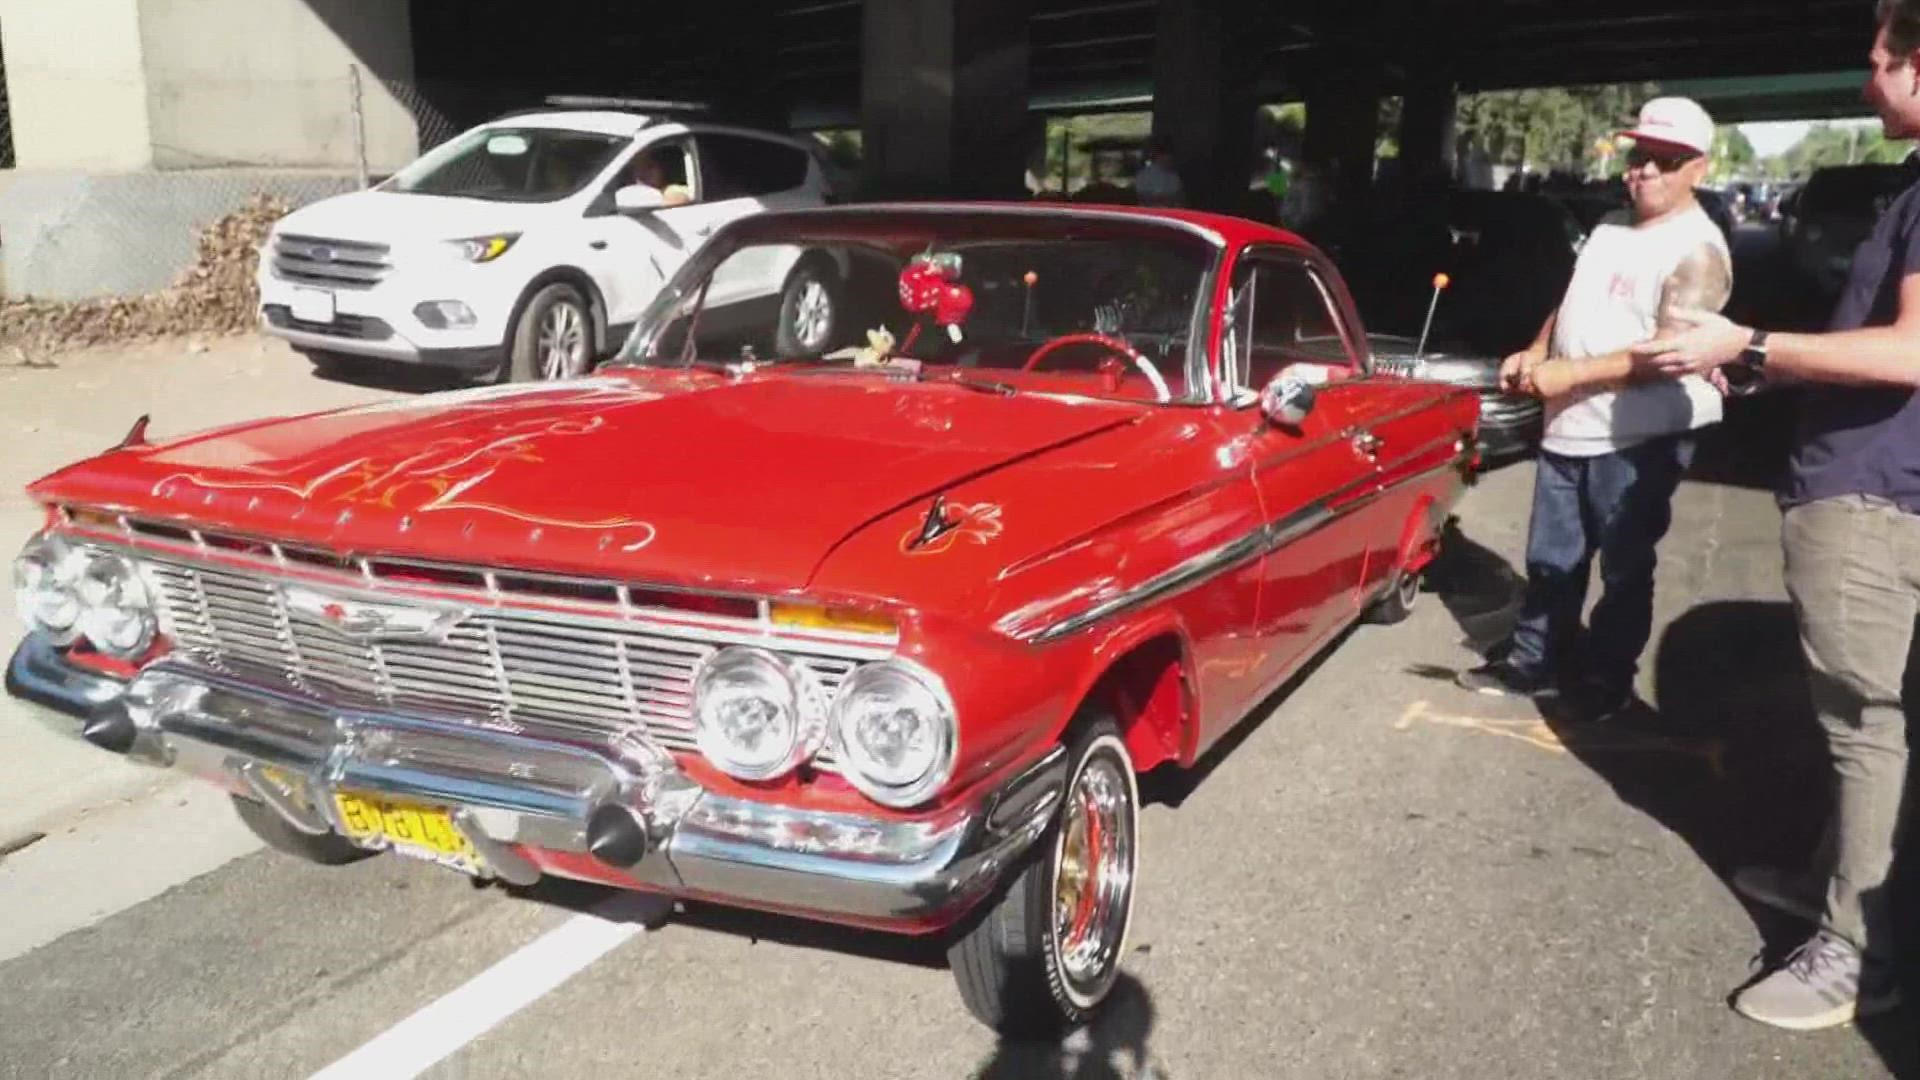 A measure that has impacted lowriders across Sacramento since 1988 was overturned by the city council back in May, and Friday the last "no cruising" signs are coming